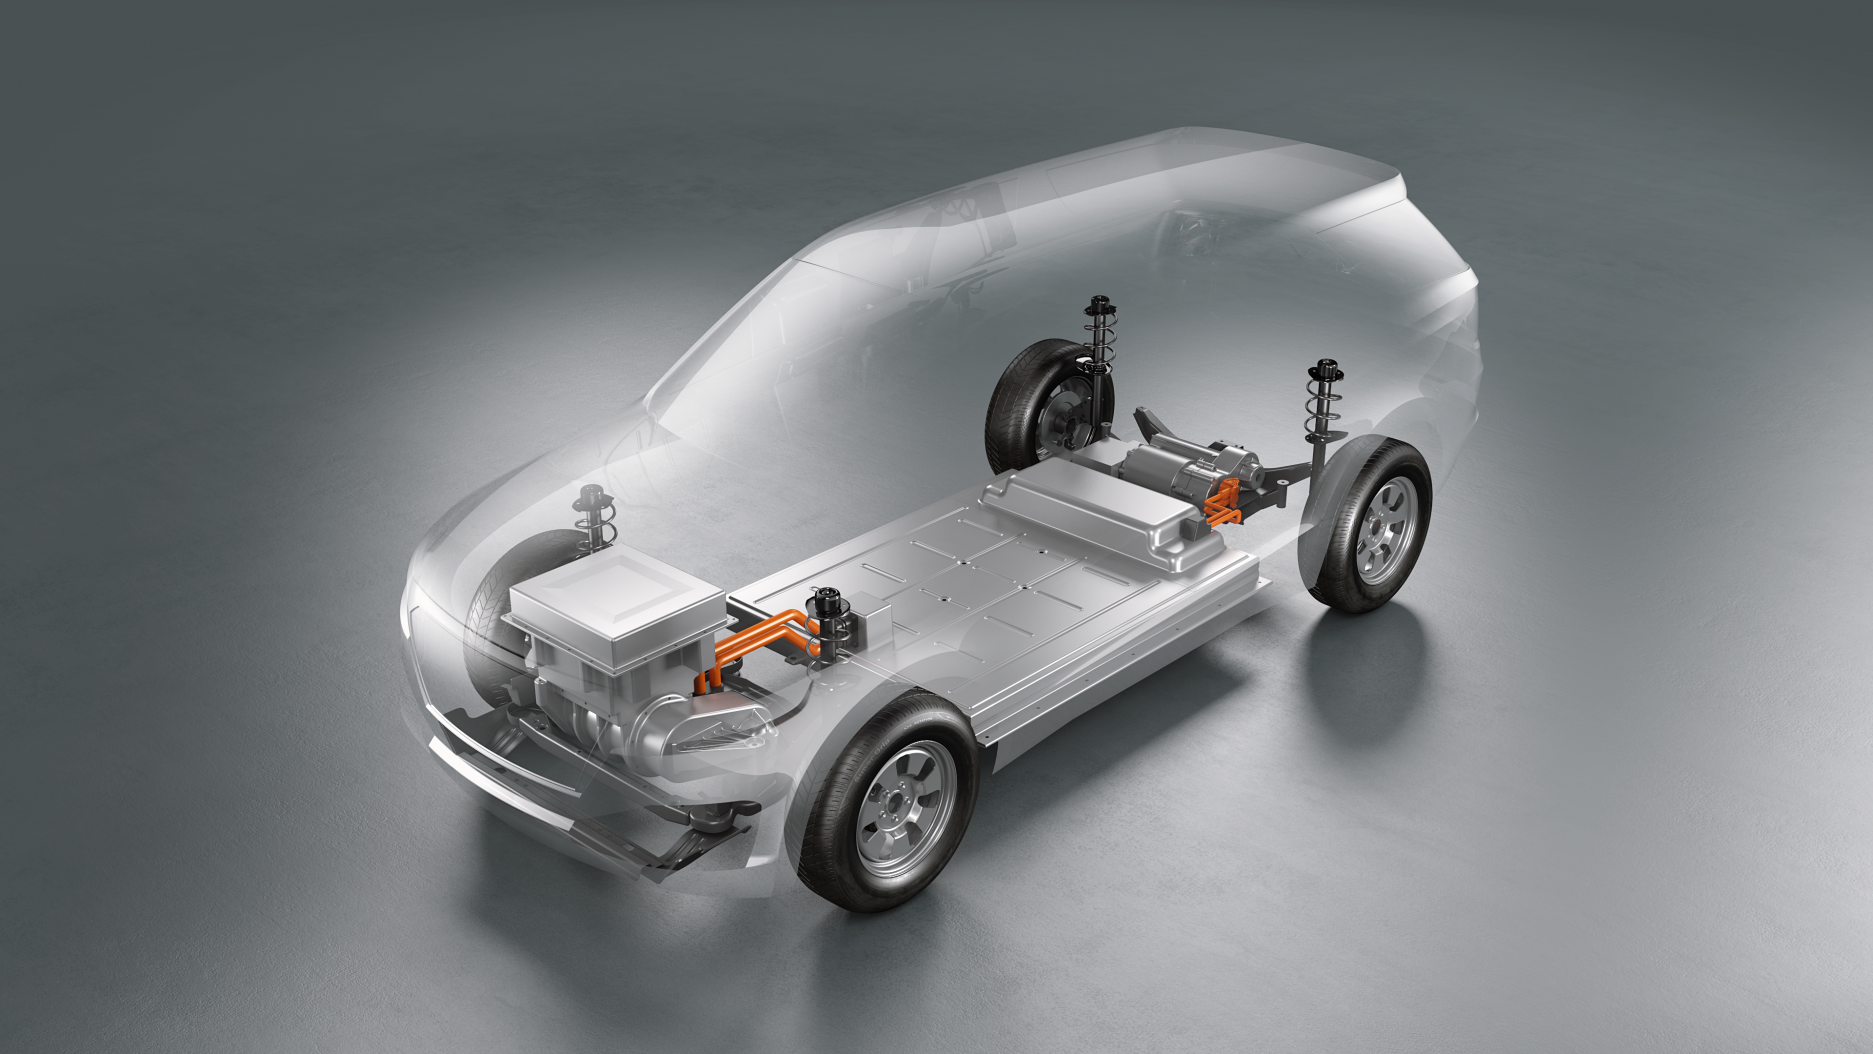 ArcelorMittal’s S-in motion® BEV study shows how smart steels and steel solutions can be applied to three key parts of BEVs: the battery pack, the body-in-white (BIW), and chassis components